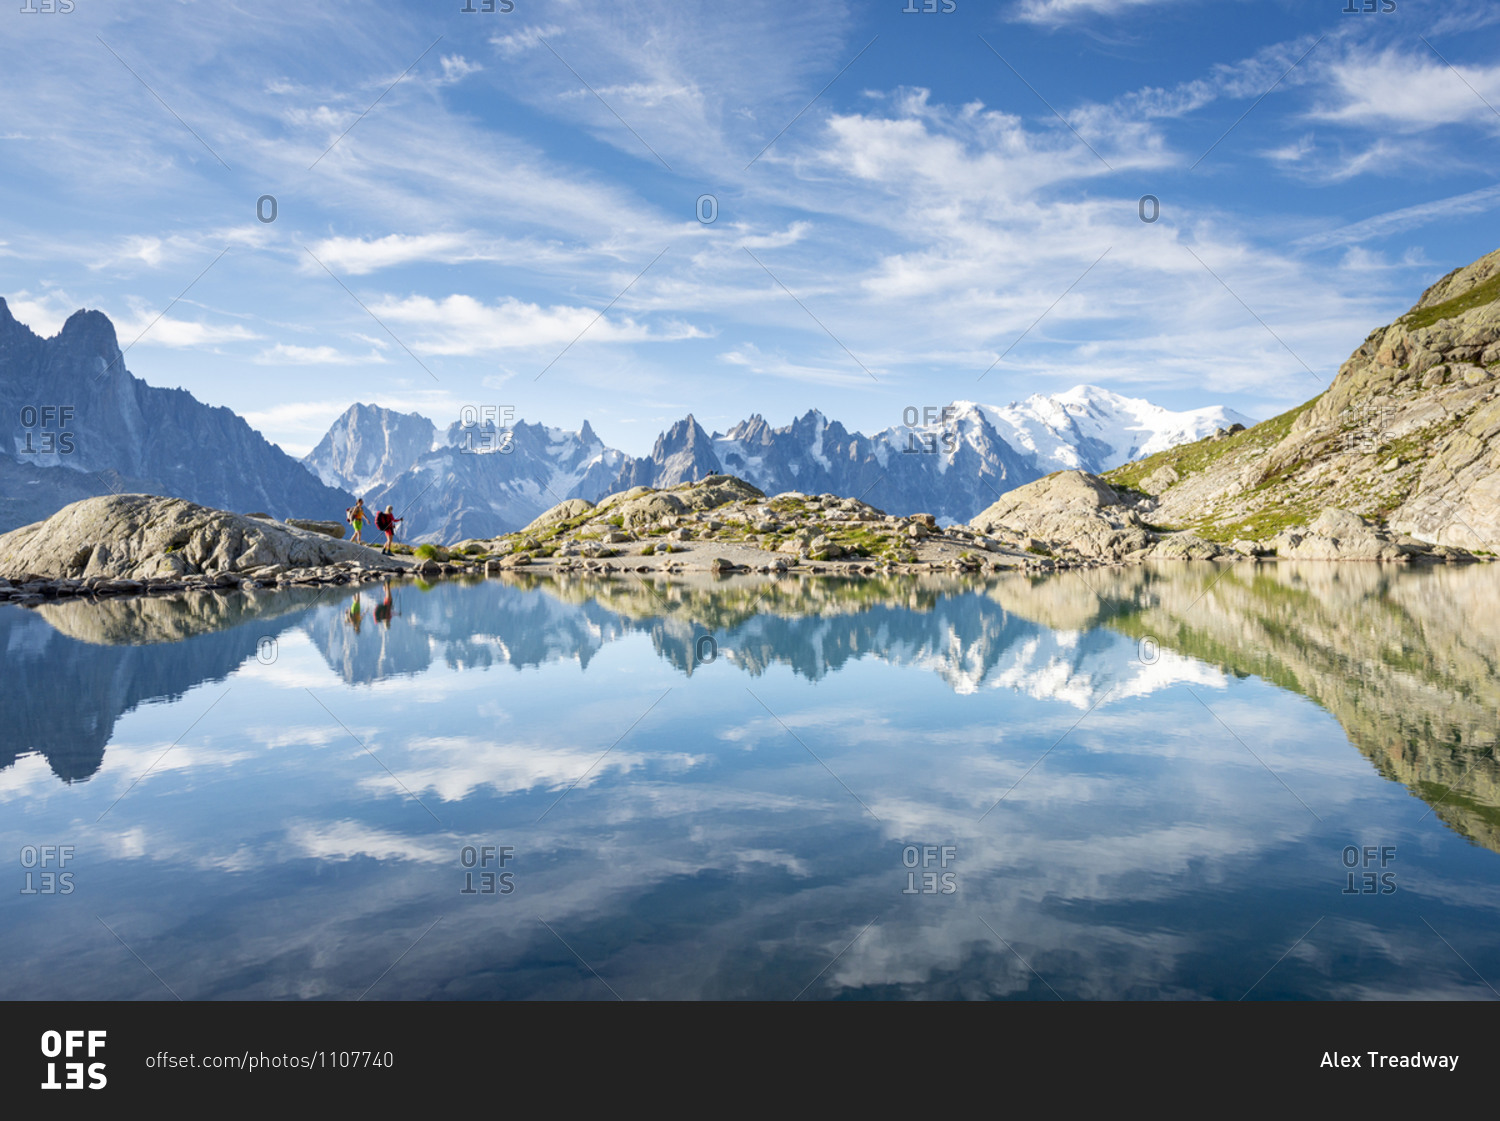 Hikers and the summit of Mont Blanc reflected in Lac Blanc on the Tour du Mont Blanc trekking route in the French Alps